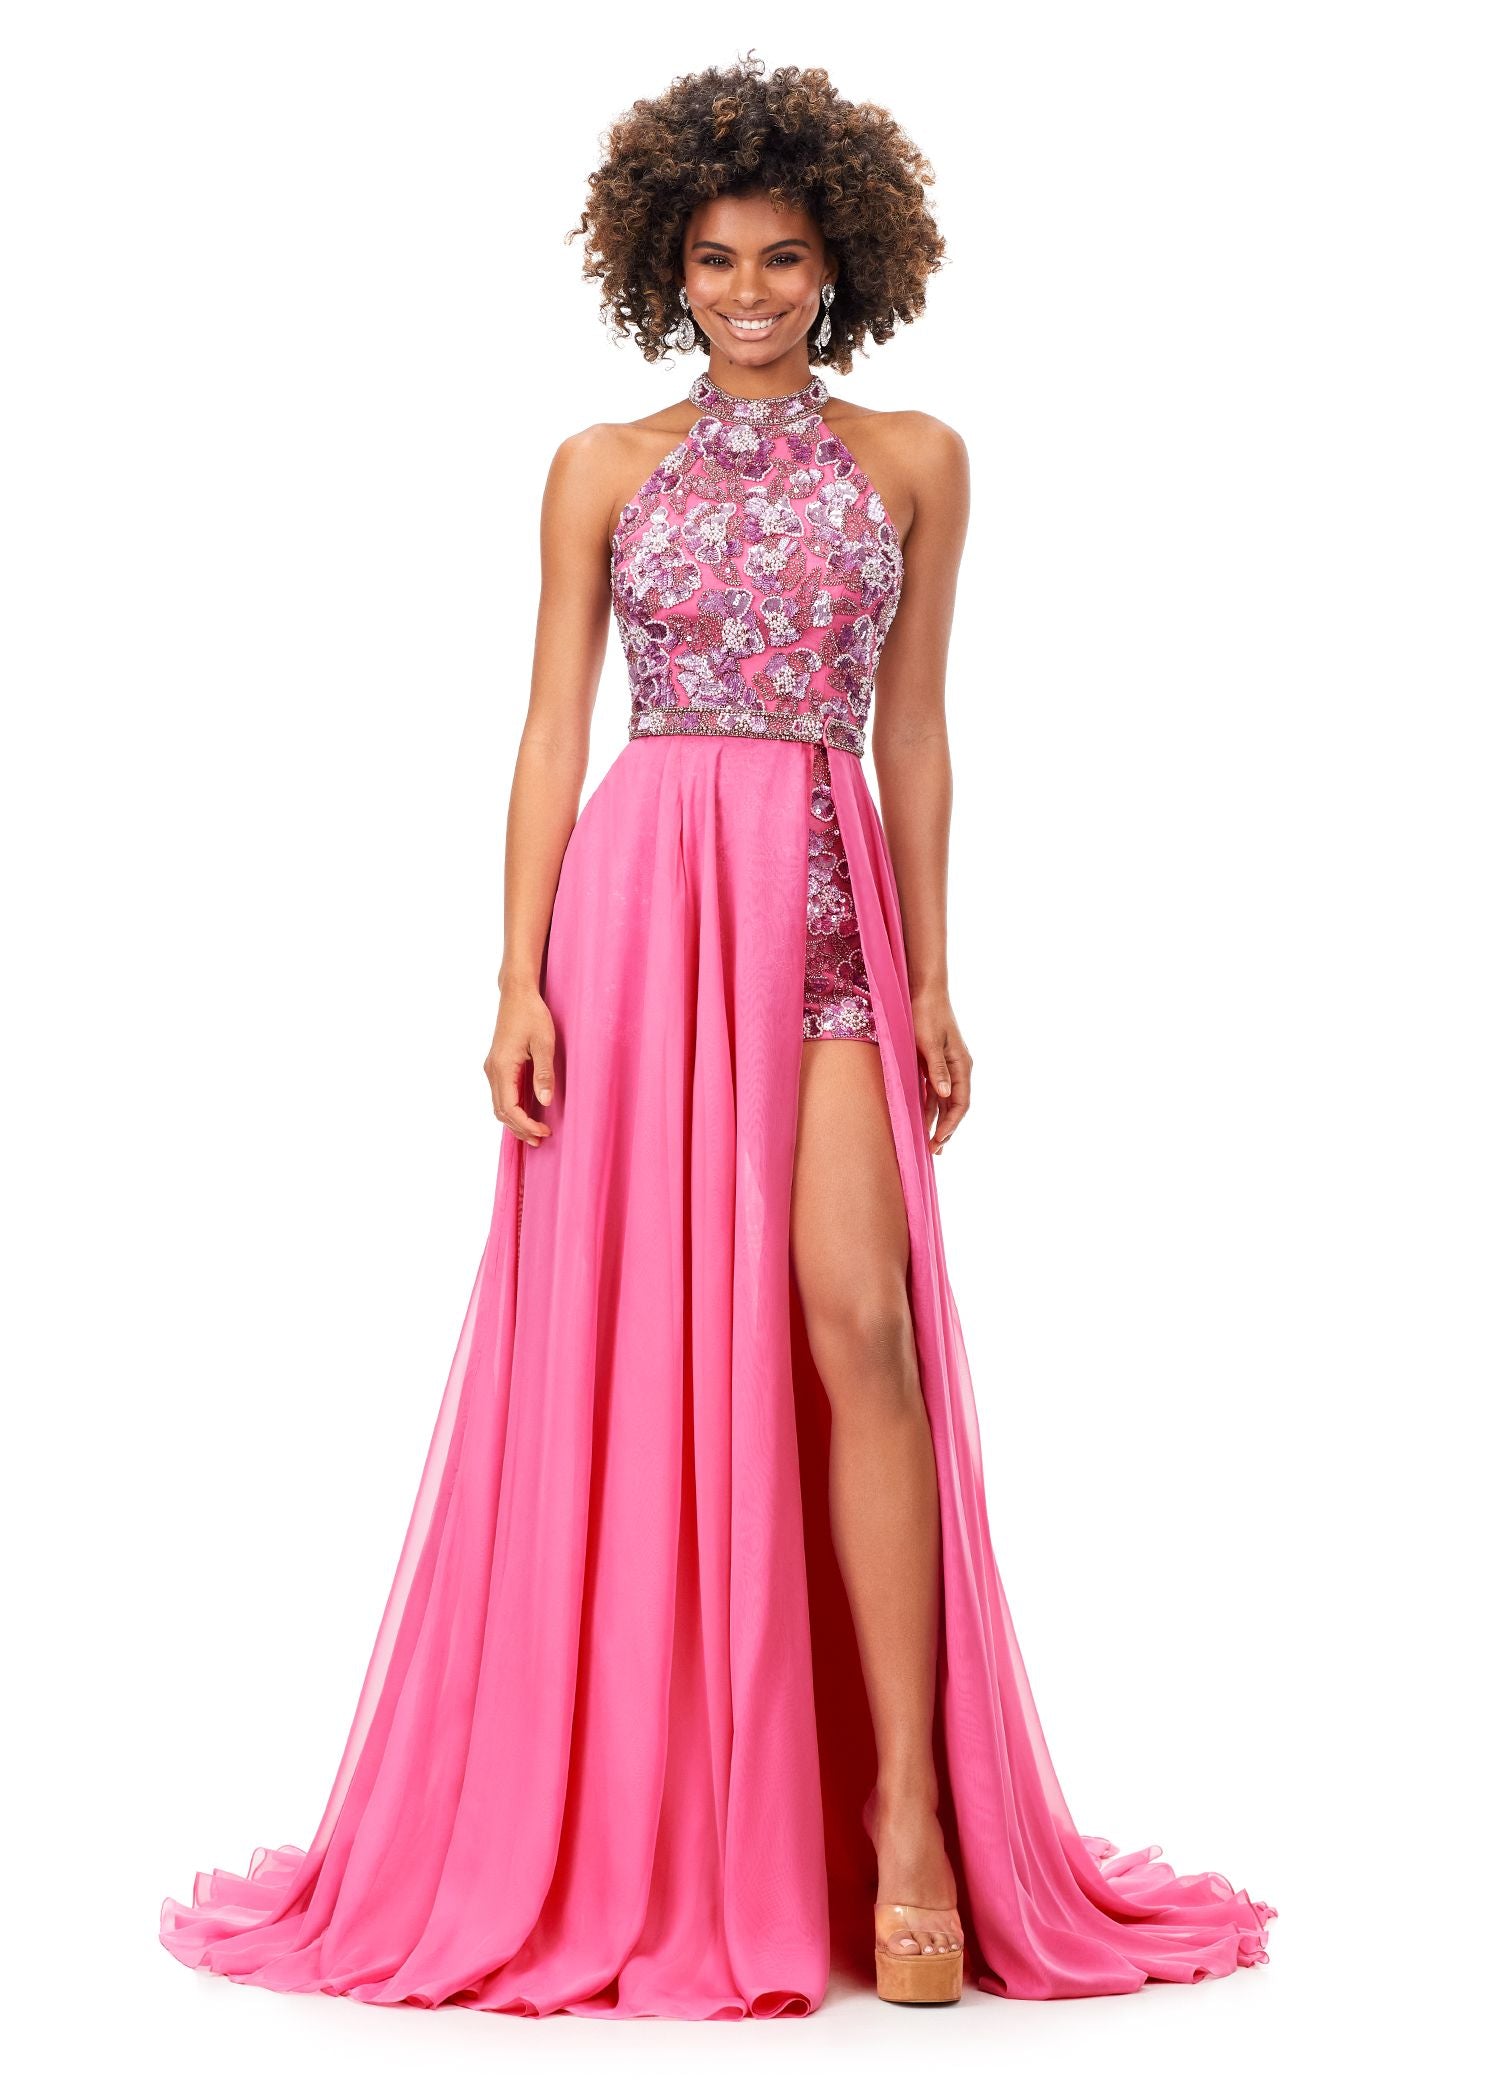 Ashley Lauren 11354 This halter romper features an intricately beaded floral motif throughout. The look is complete with a chiffon detachable skirt and beaded belt. Halter Neckline Romper Detachable Chiffon Overskirt Fully Hand Beaded COLORS: Black, Red, Ivory, Royal, Orchid/Pink